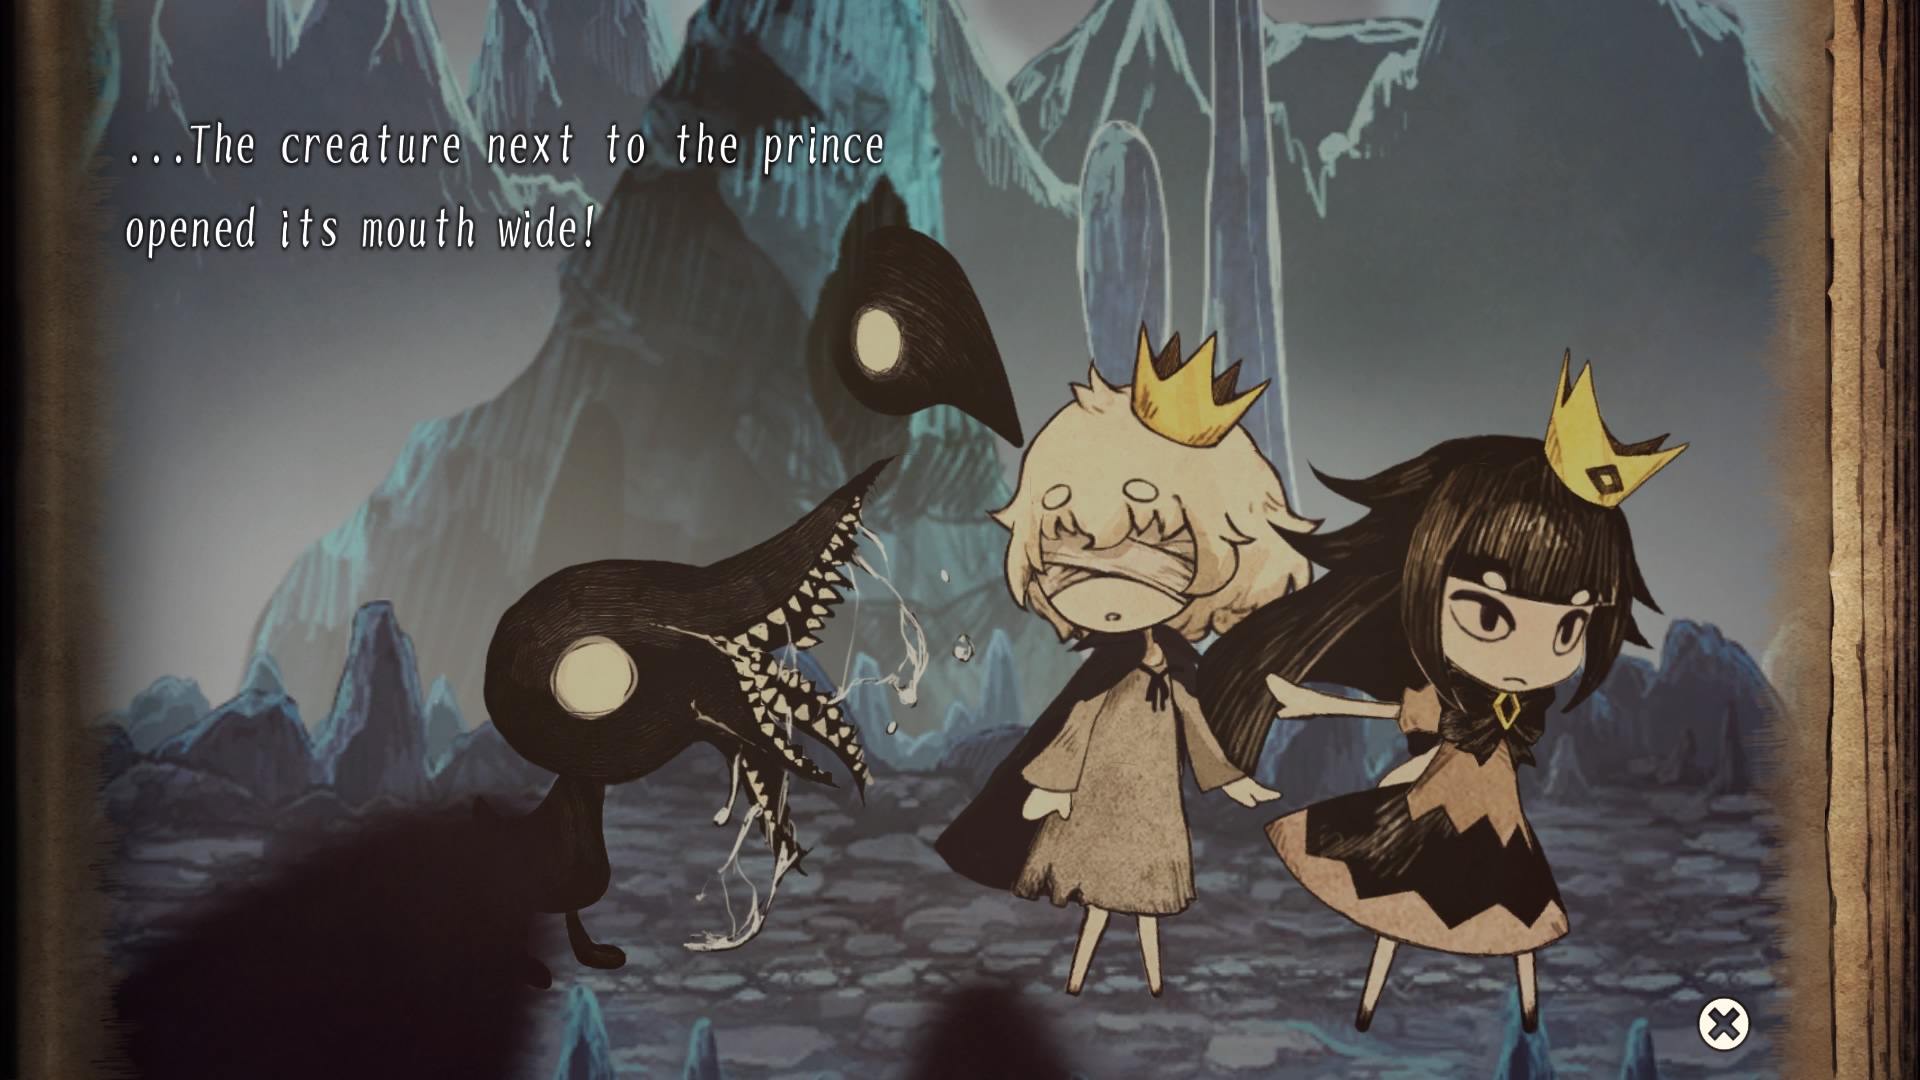 The Liar Princess and the Blind Prince review #1